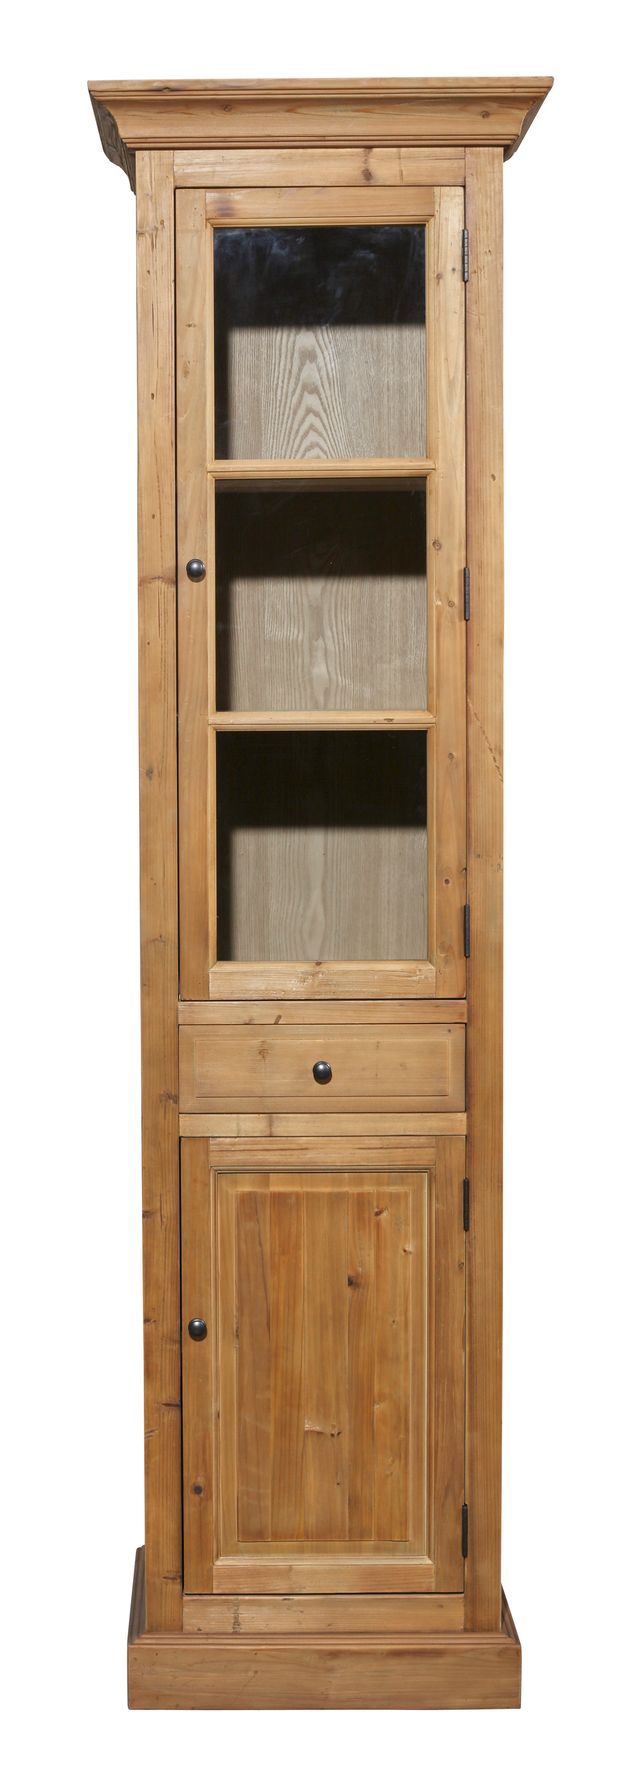 Two-Door Cabinet in Natural Pine Finish with Flat Front Top